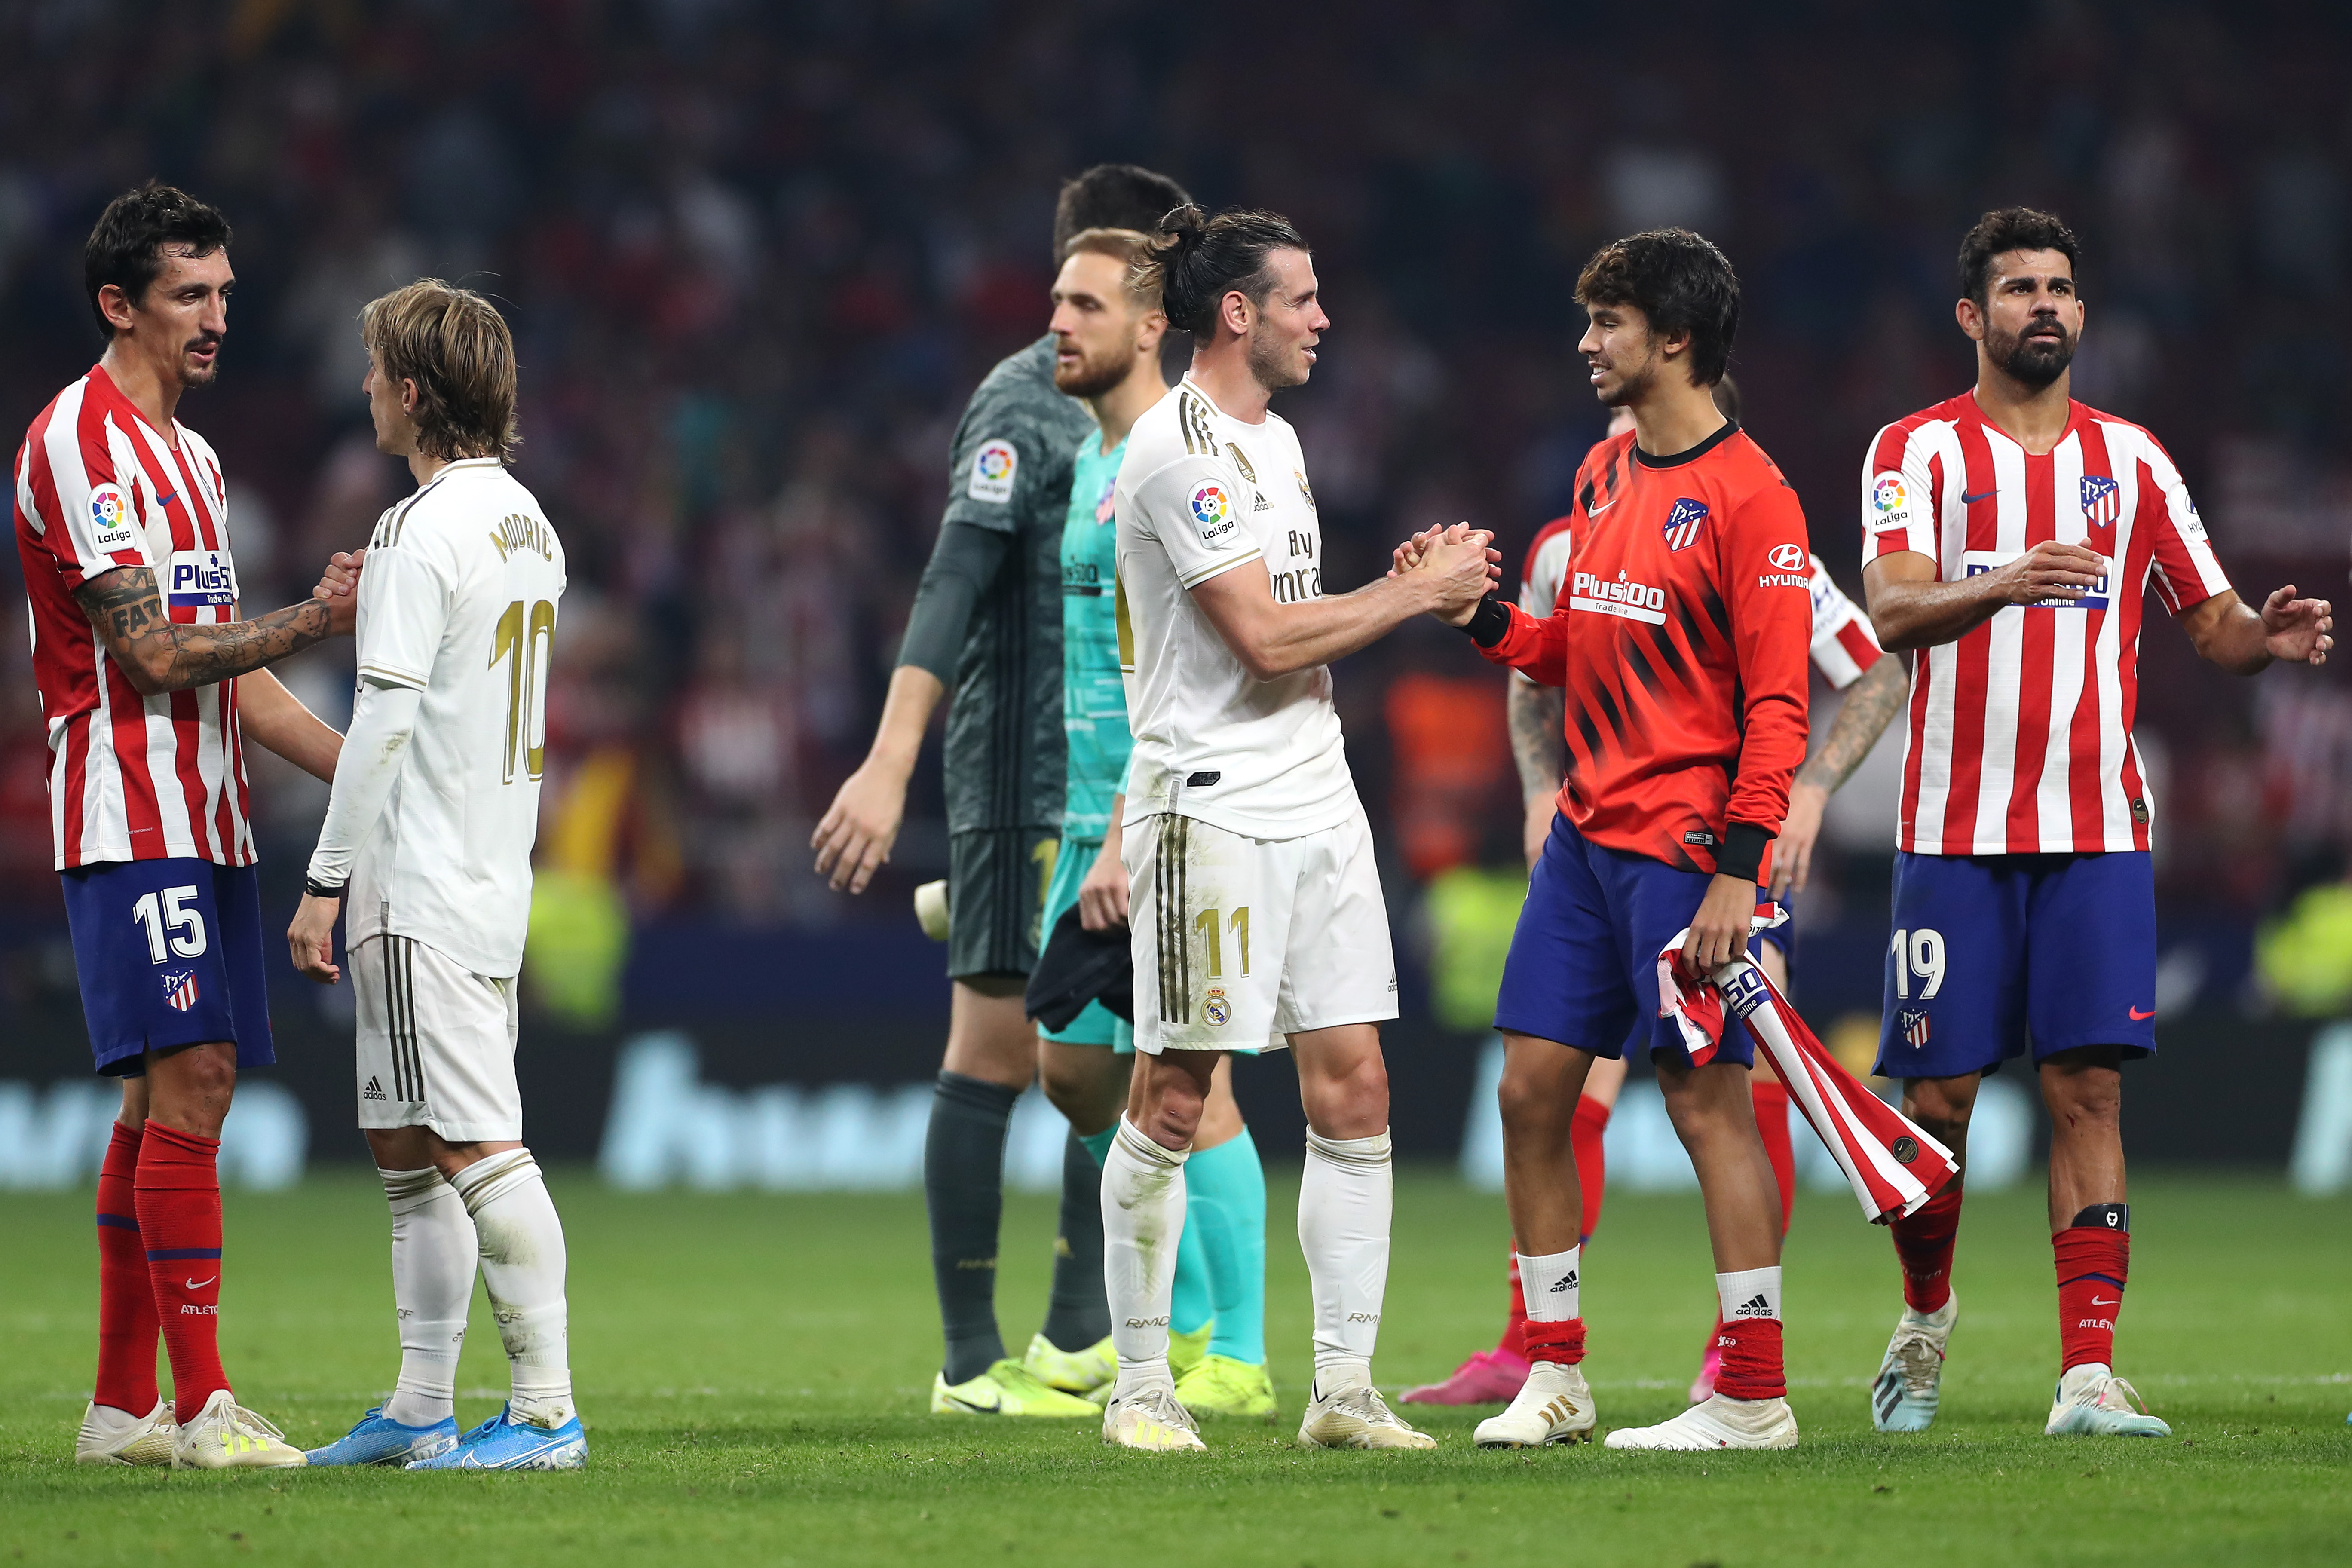 MADRID, SPAIN - SEPTEMBER 28: Joao Felix of Atletico Madrid speaks to Gareth Bale of Real Madrid after the Liga match between Club Atletico de Madrid and Real Madrid CF at Wanda Metropolitano on September 28, 2019 in Madrid, Spain. (Photo by Angel Martinez/Getty Images)